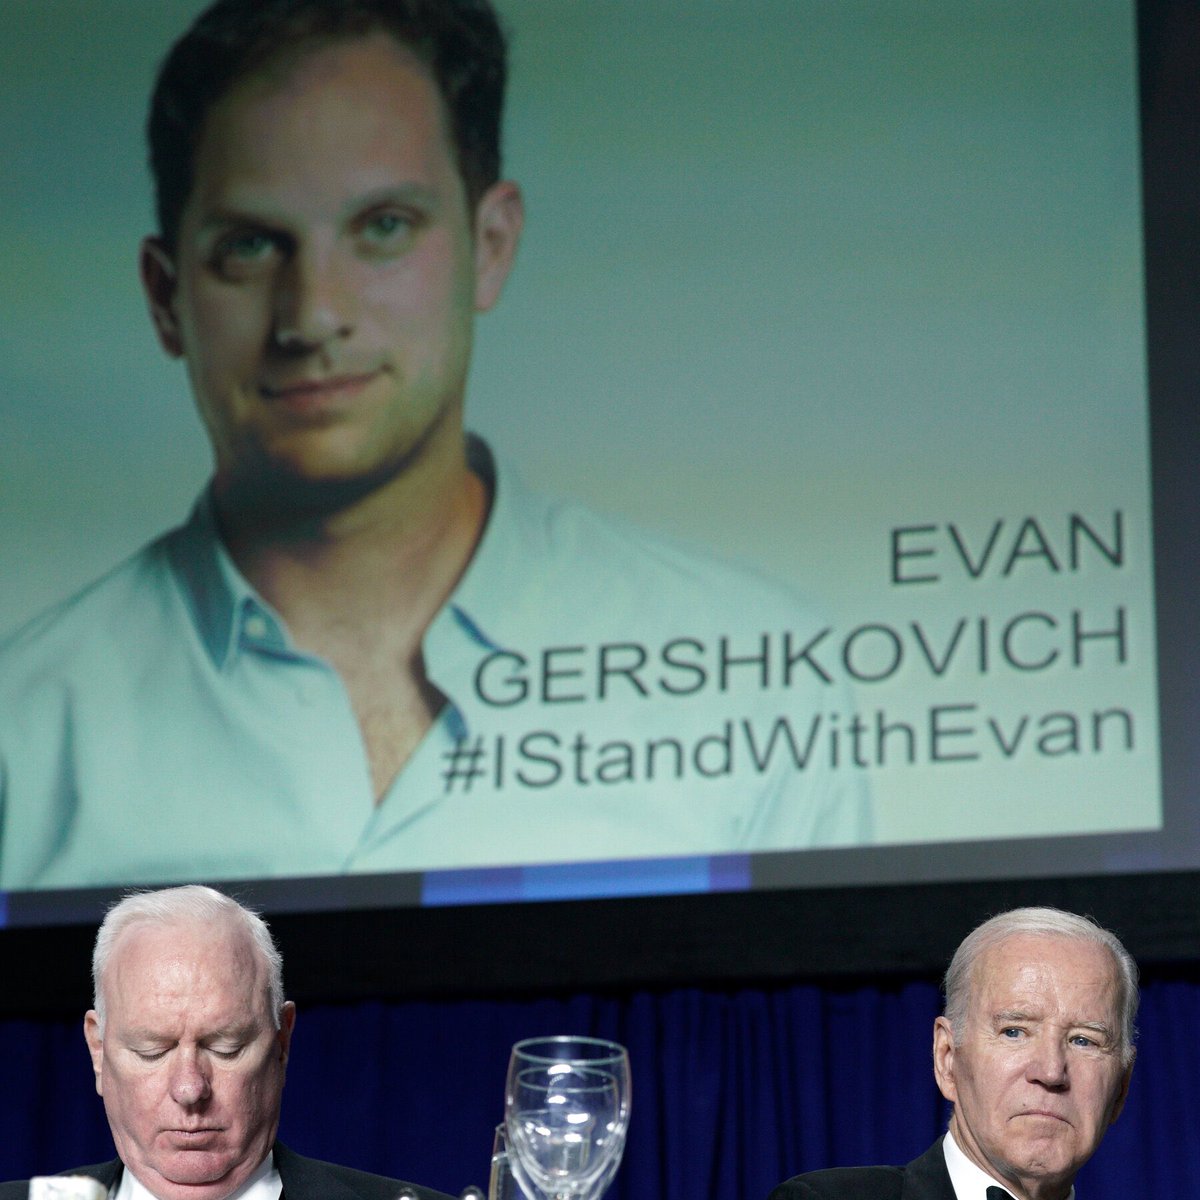 “We’re working every day to secure his release, looking at opportunities and tools to bring him home. We keep the faith.”

Joe Biden comments about Mr. Gershkovich at the White House Correspondents’ Association dinner

@RSF_inter 

#StandWithEvan